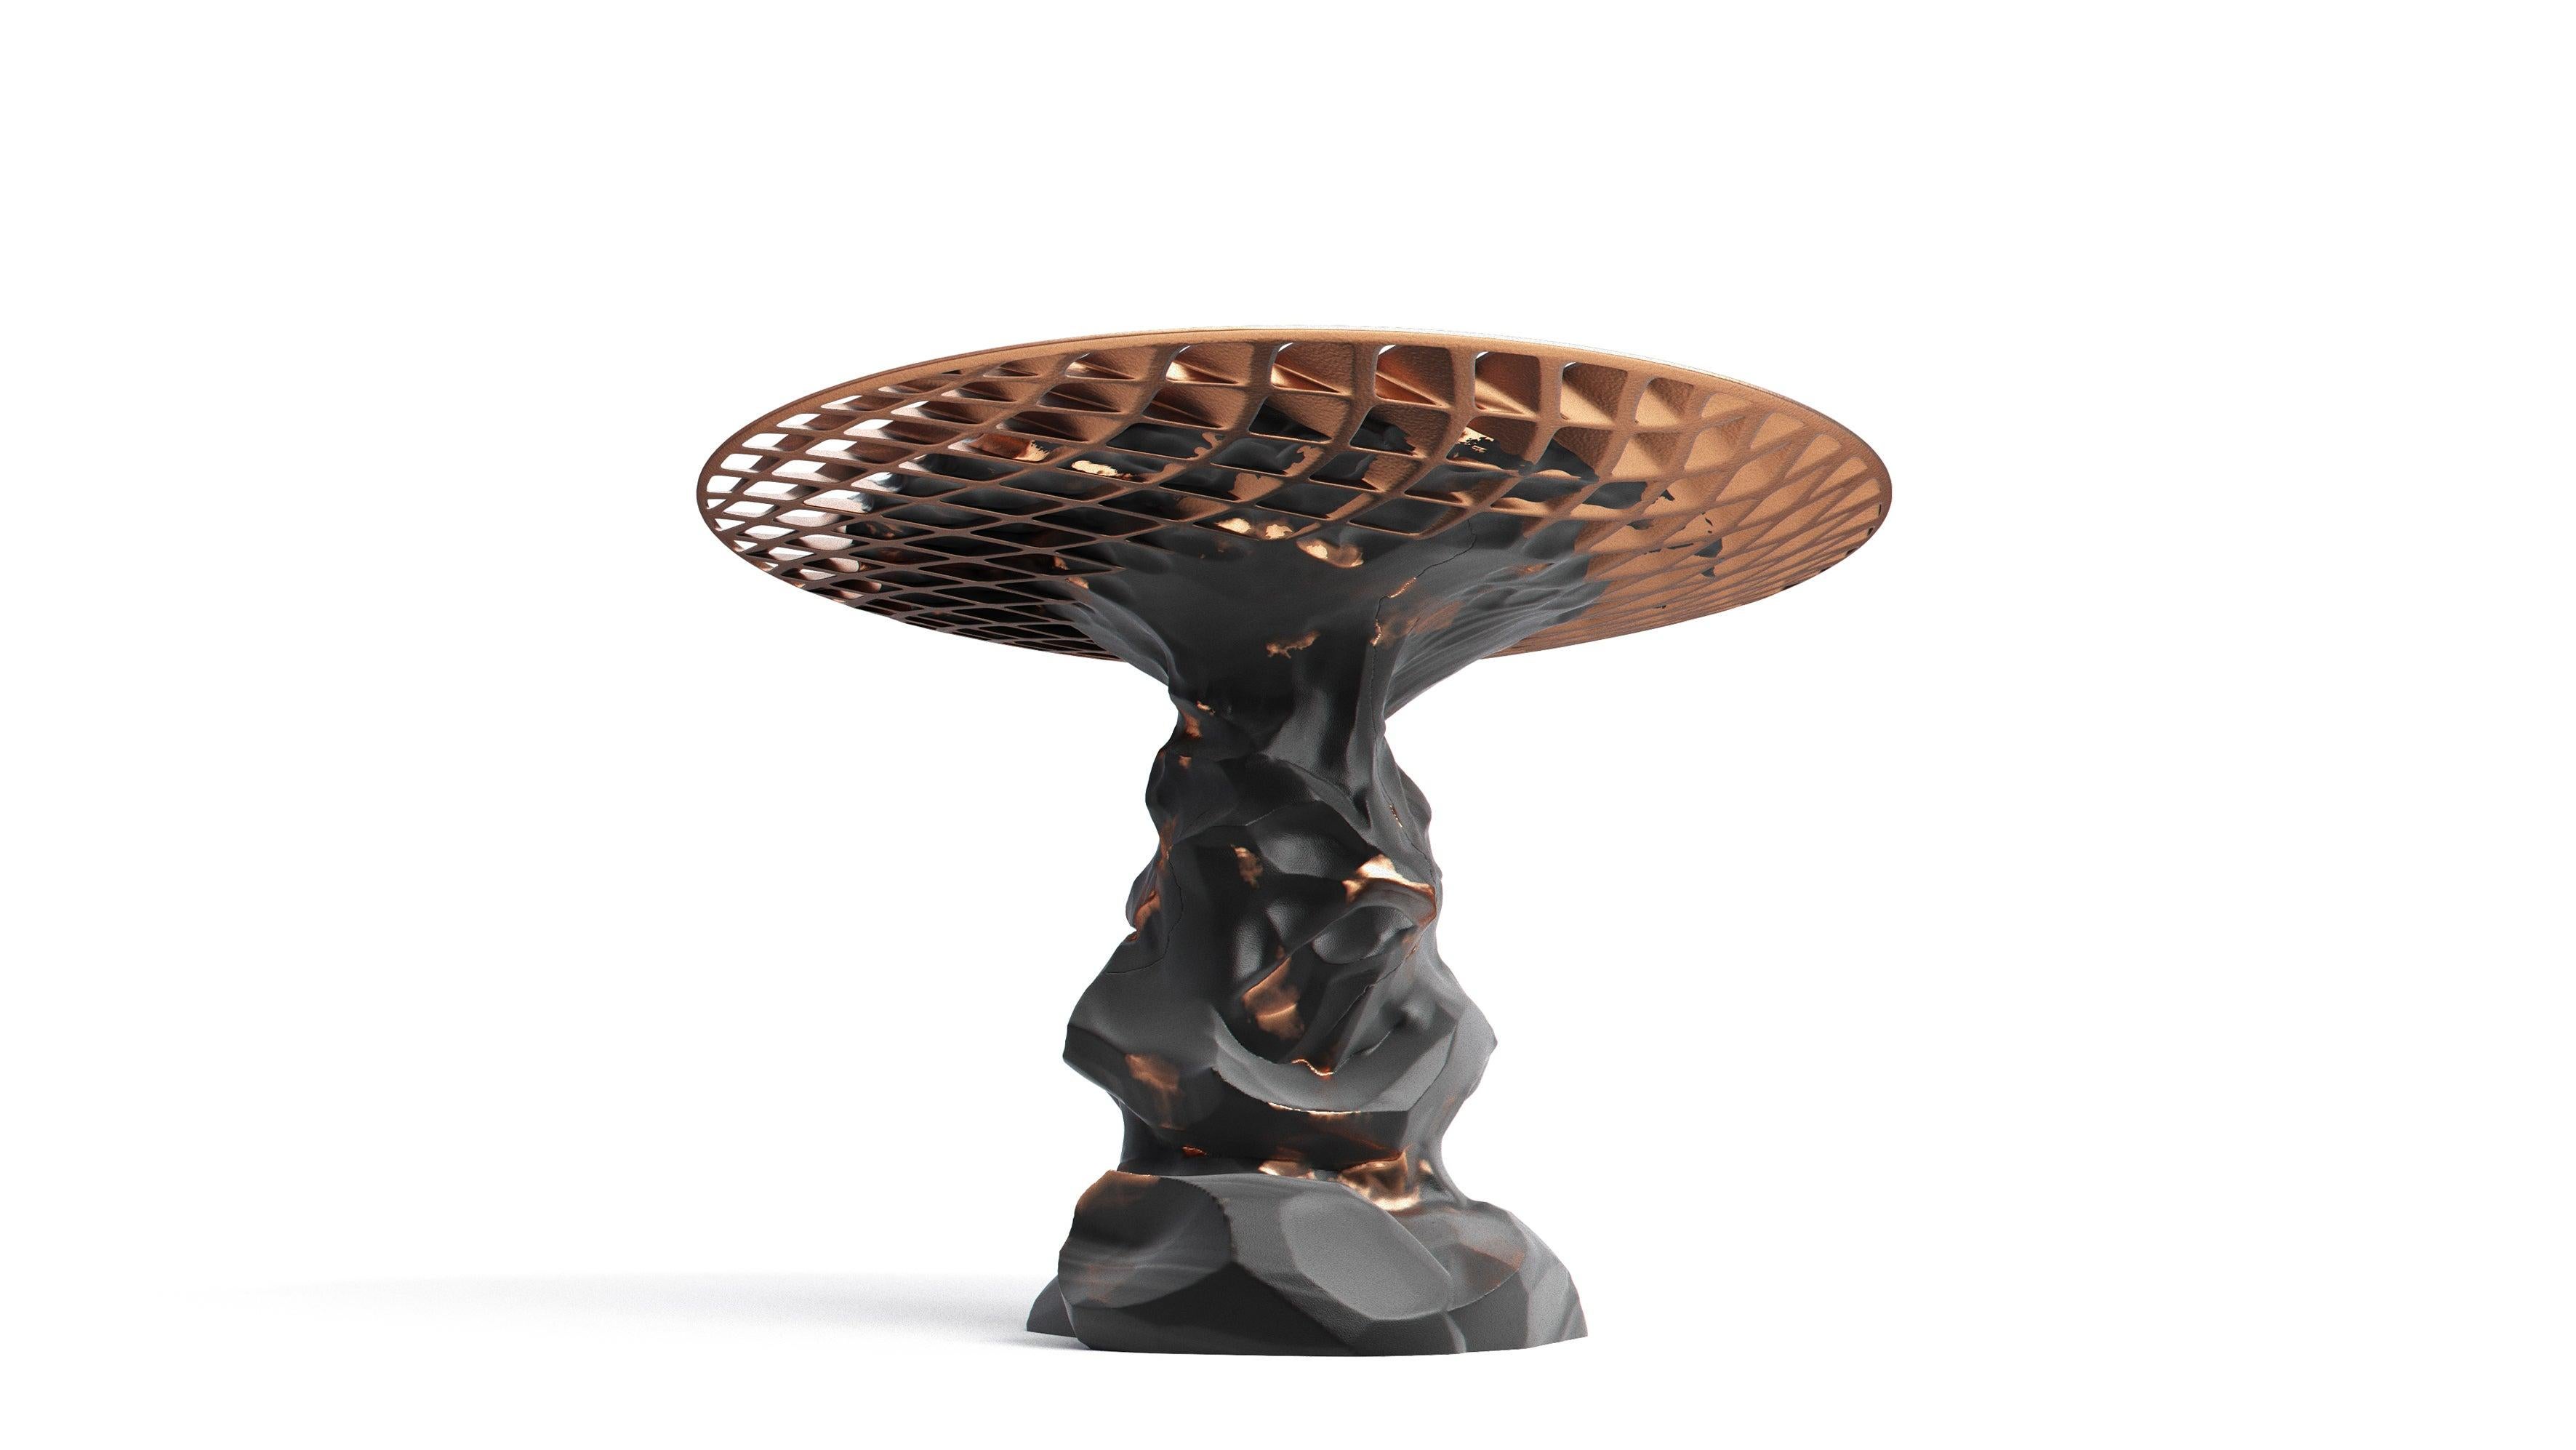 The Metsidian shelf and Metsidian side table are dynamic works that represent a moment in time, an eruption that melds two divergent materials together. The Prehistoric evolves into the futuristic as organic volcanic Obsidian transforms into clean,